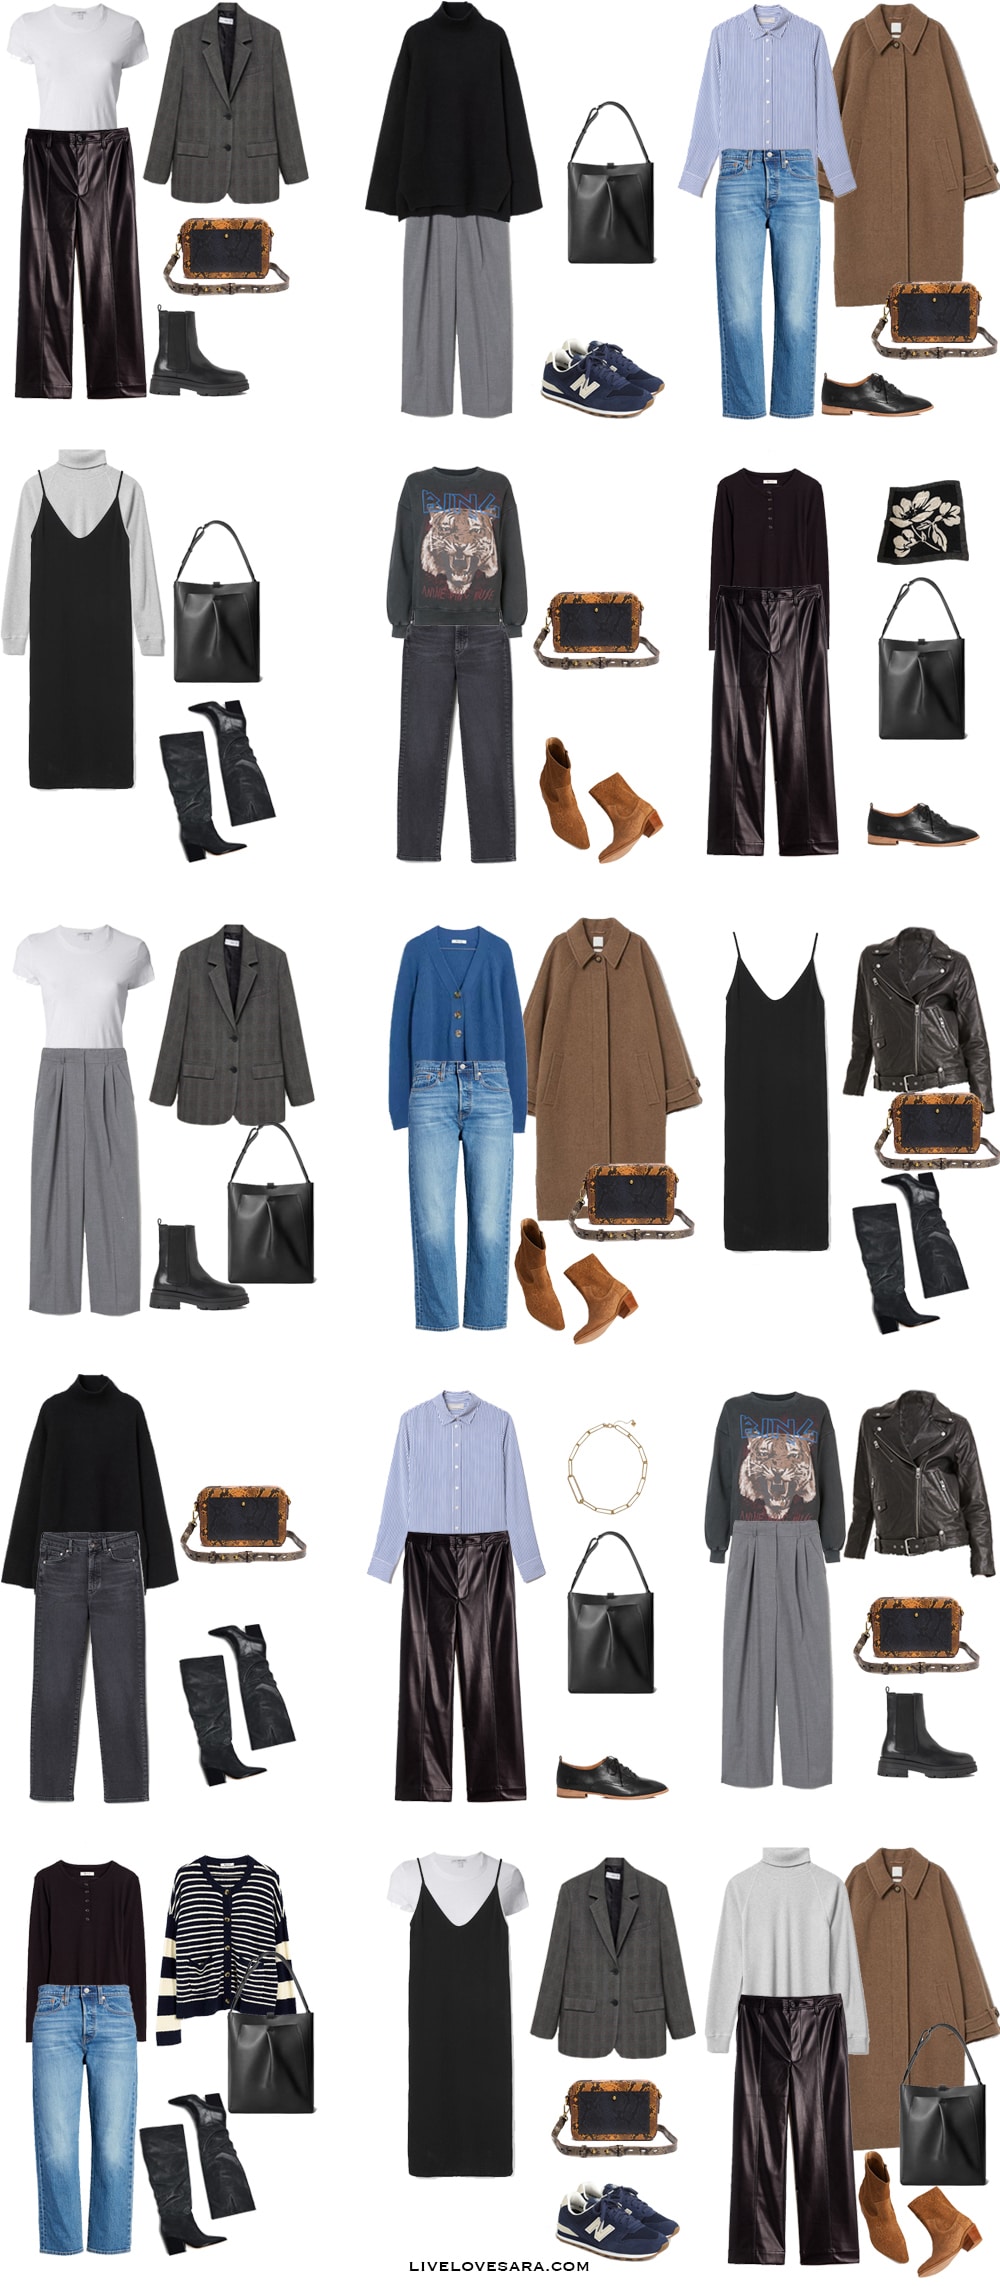 A Rock Chic Inspired Fall Capsule Wardrobe Outfits 16-30